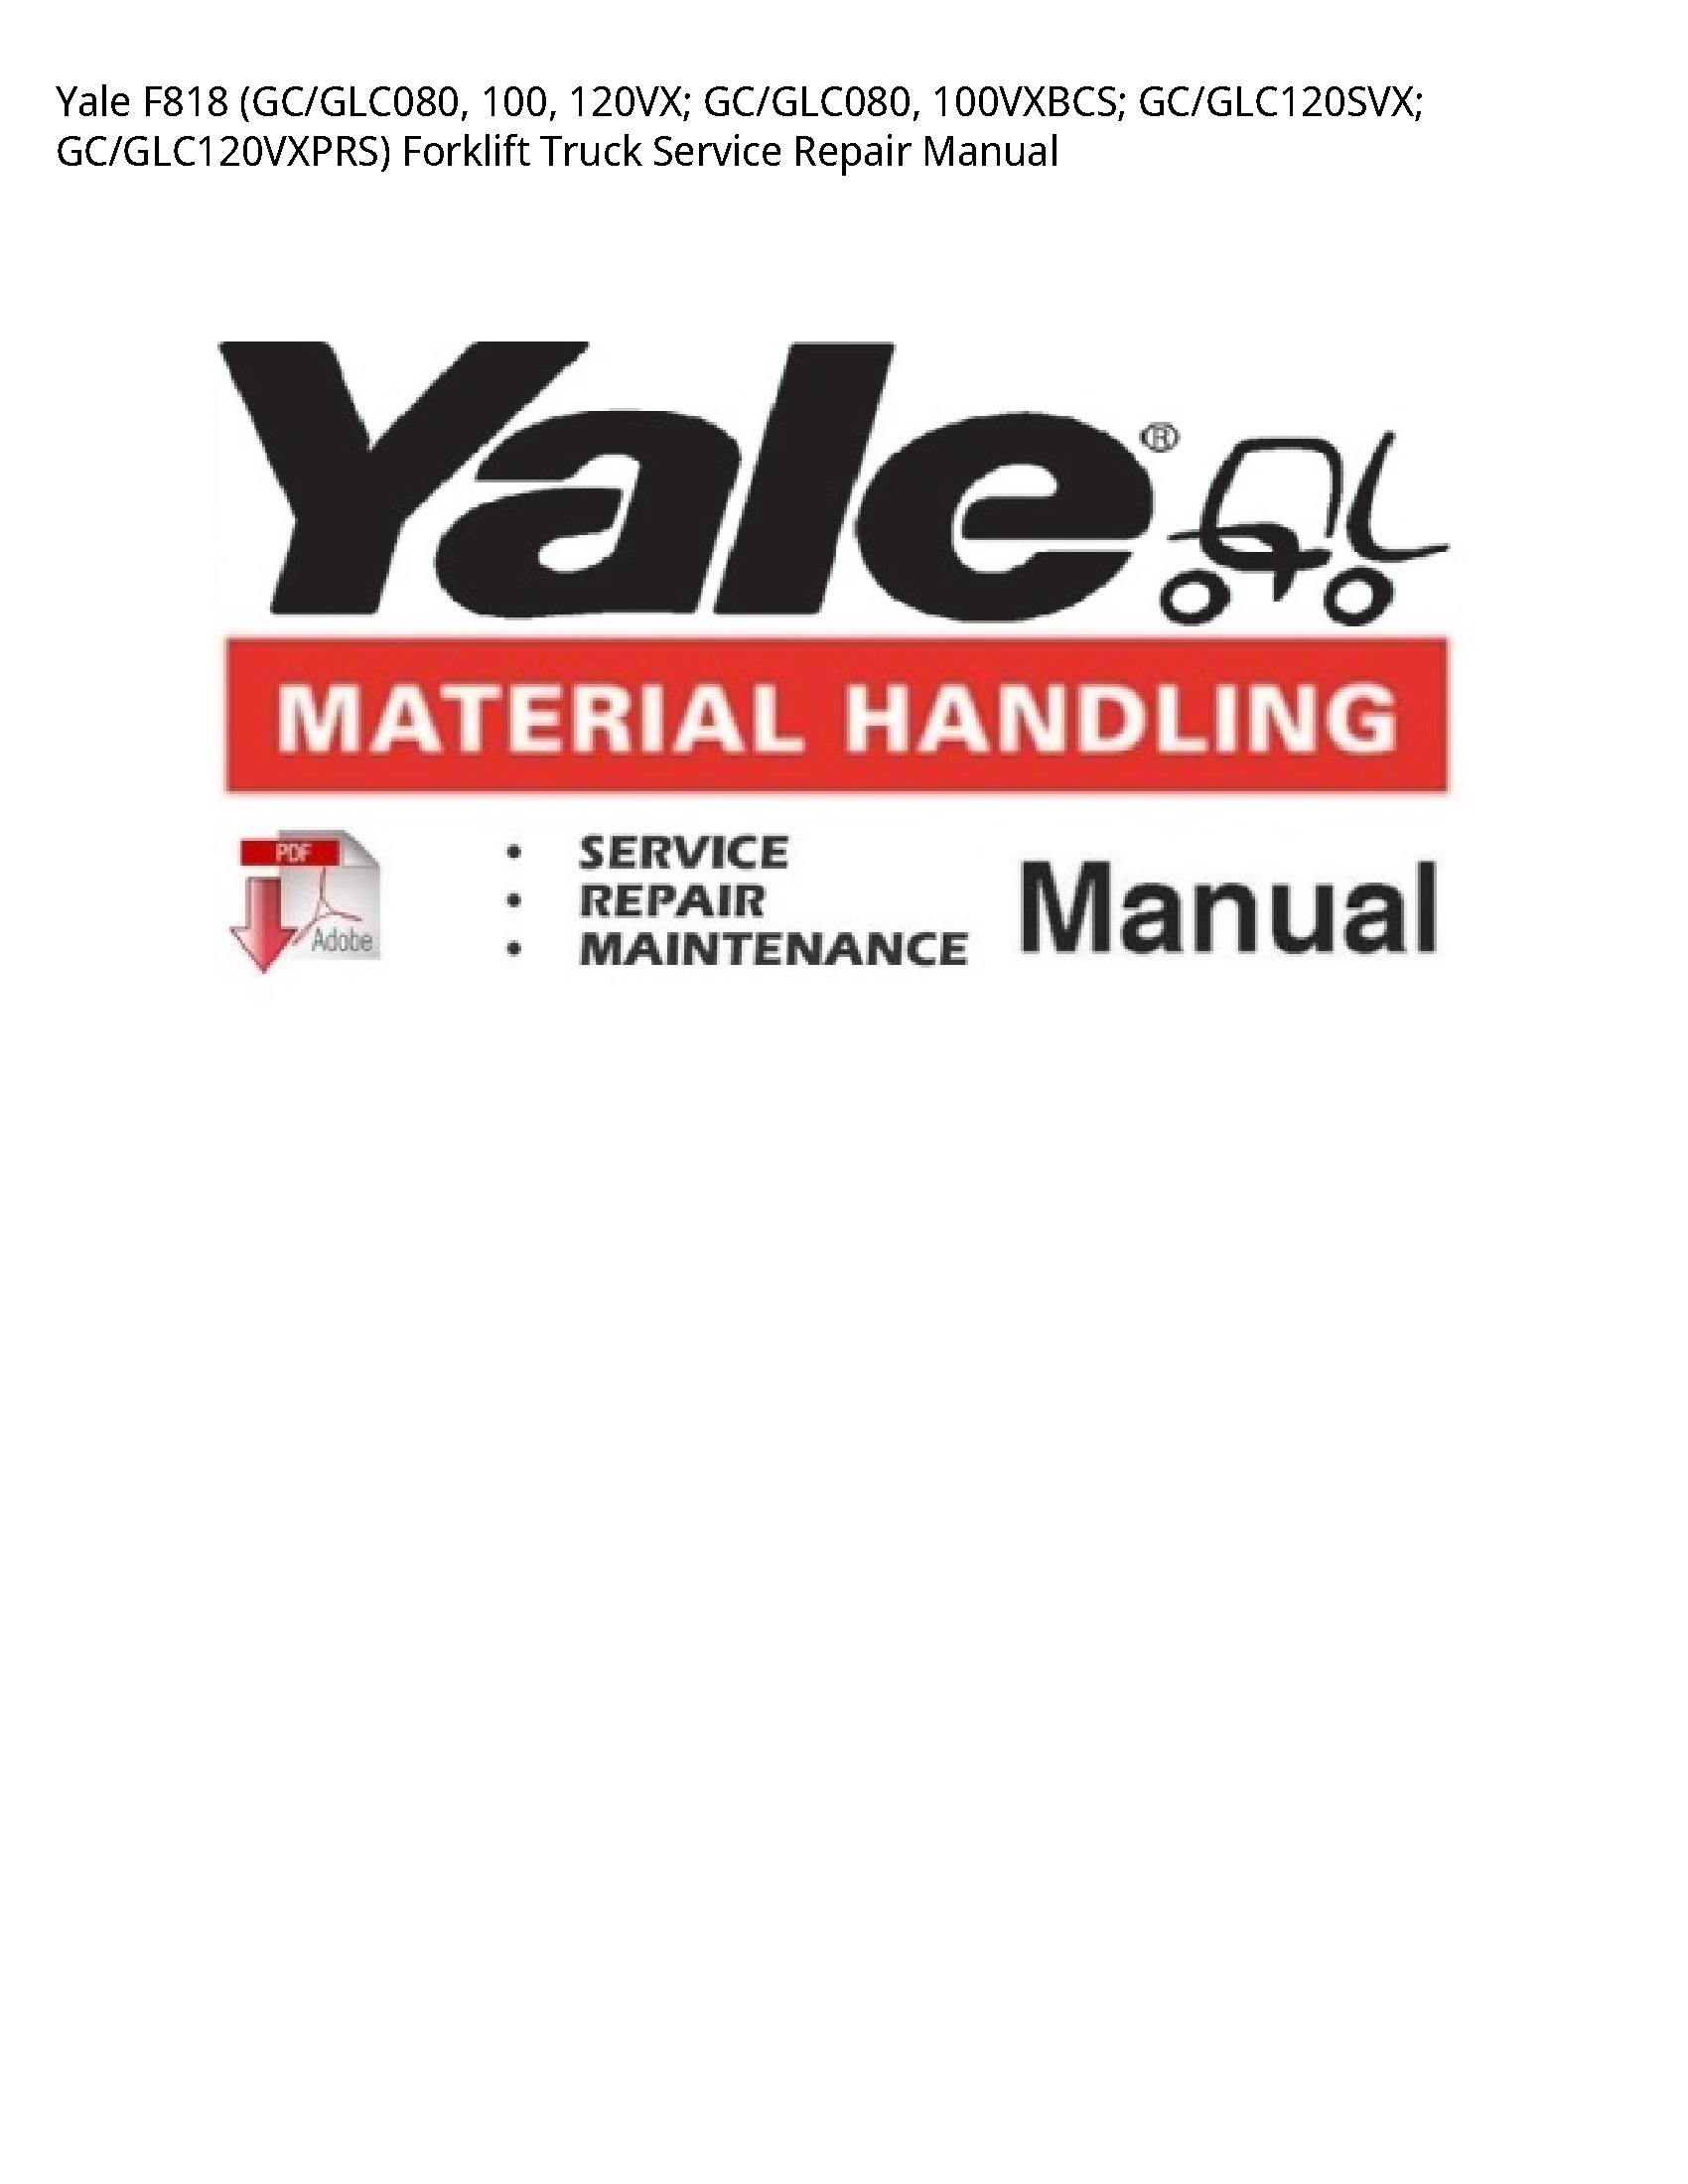 Yale F818 Forklift Truck manual